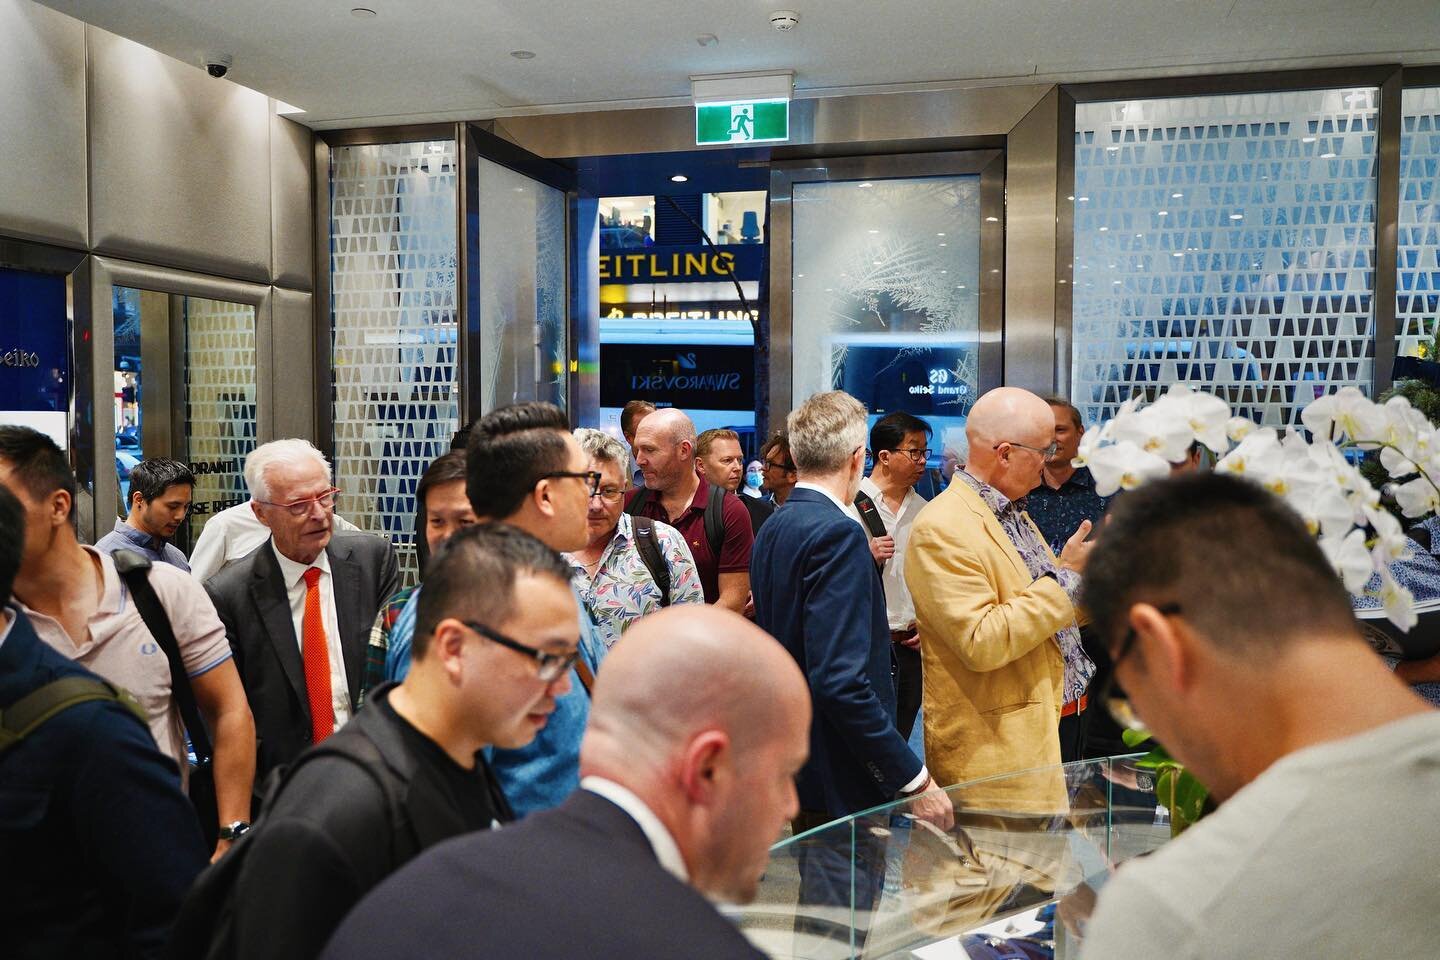 Grand Seiko at the Watch Crawl! Thank you to all attendees for coming. Thank you to @grandseikoboutiquesydney for being part of Watchfest and for the extension of hospitality. Always appreciative of your support for the Australian watch community. 

